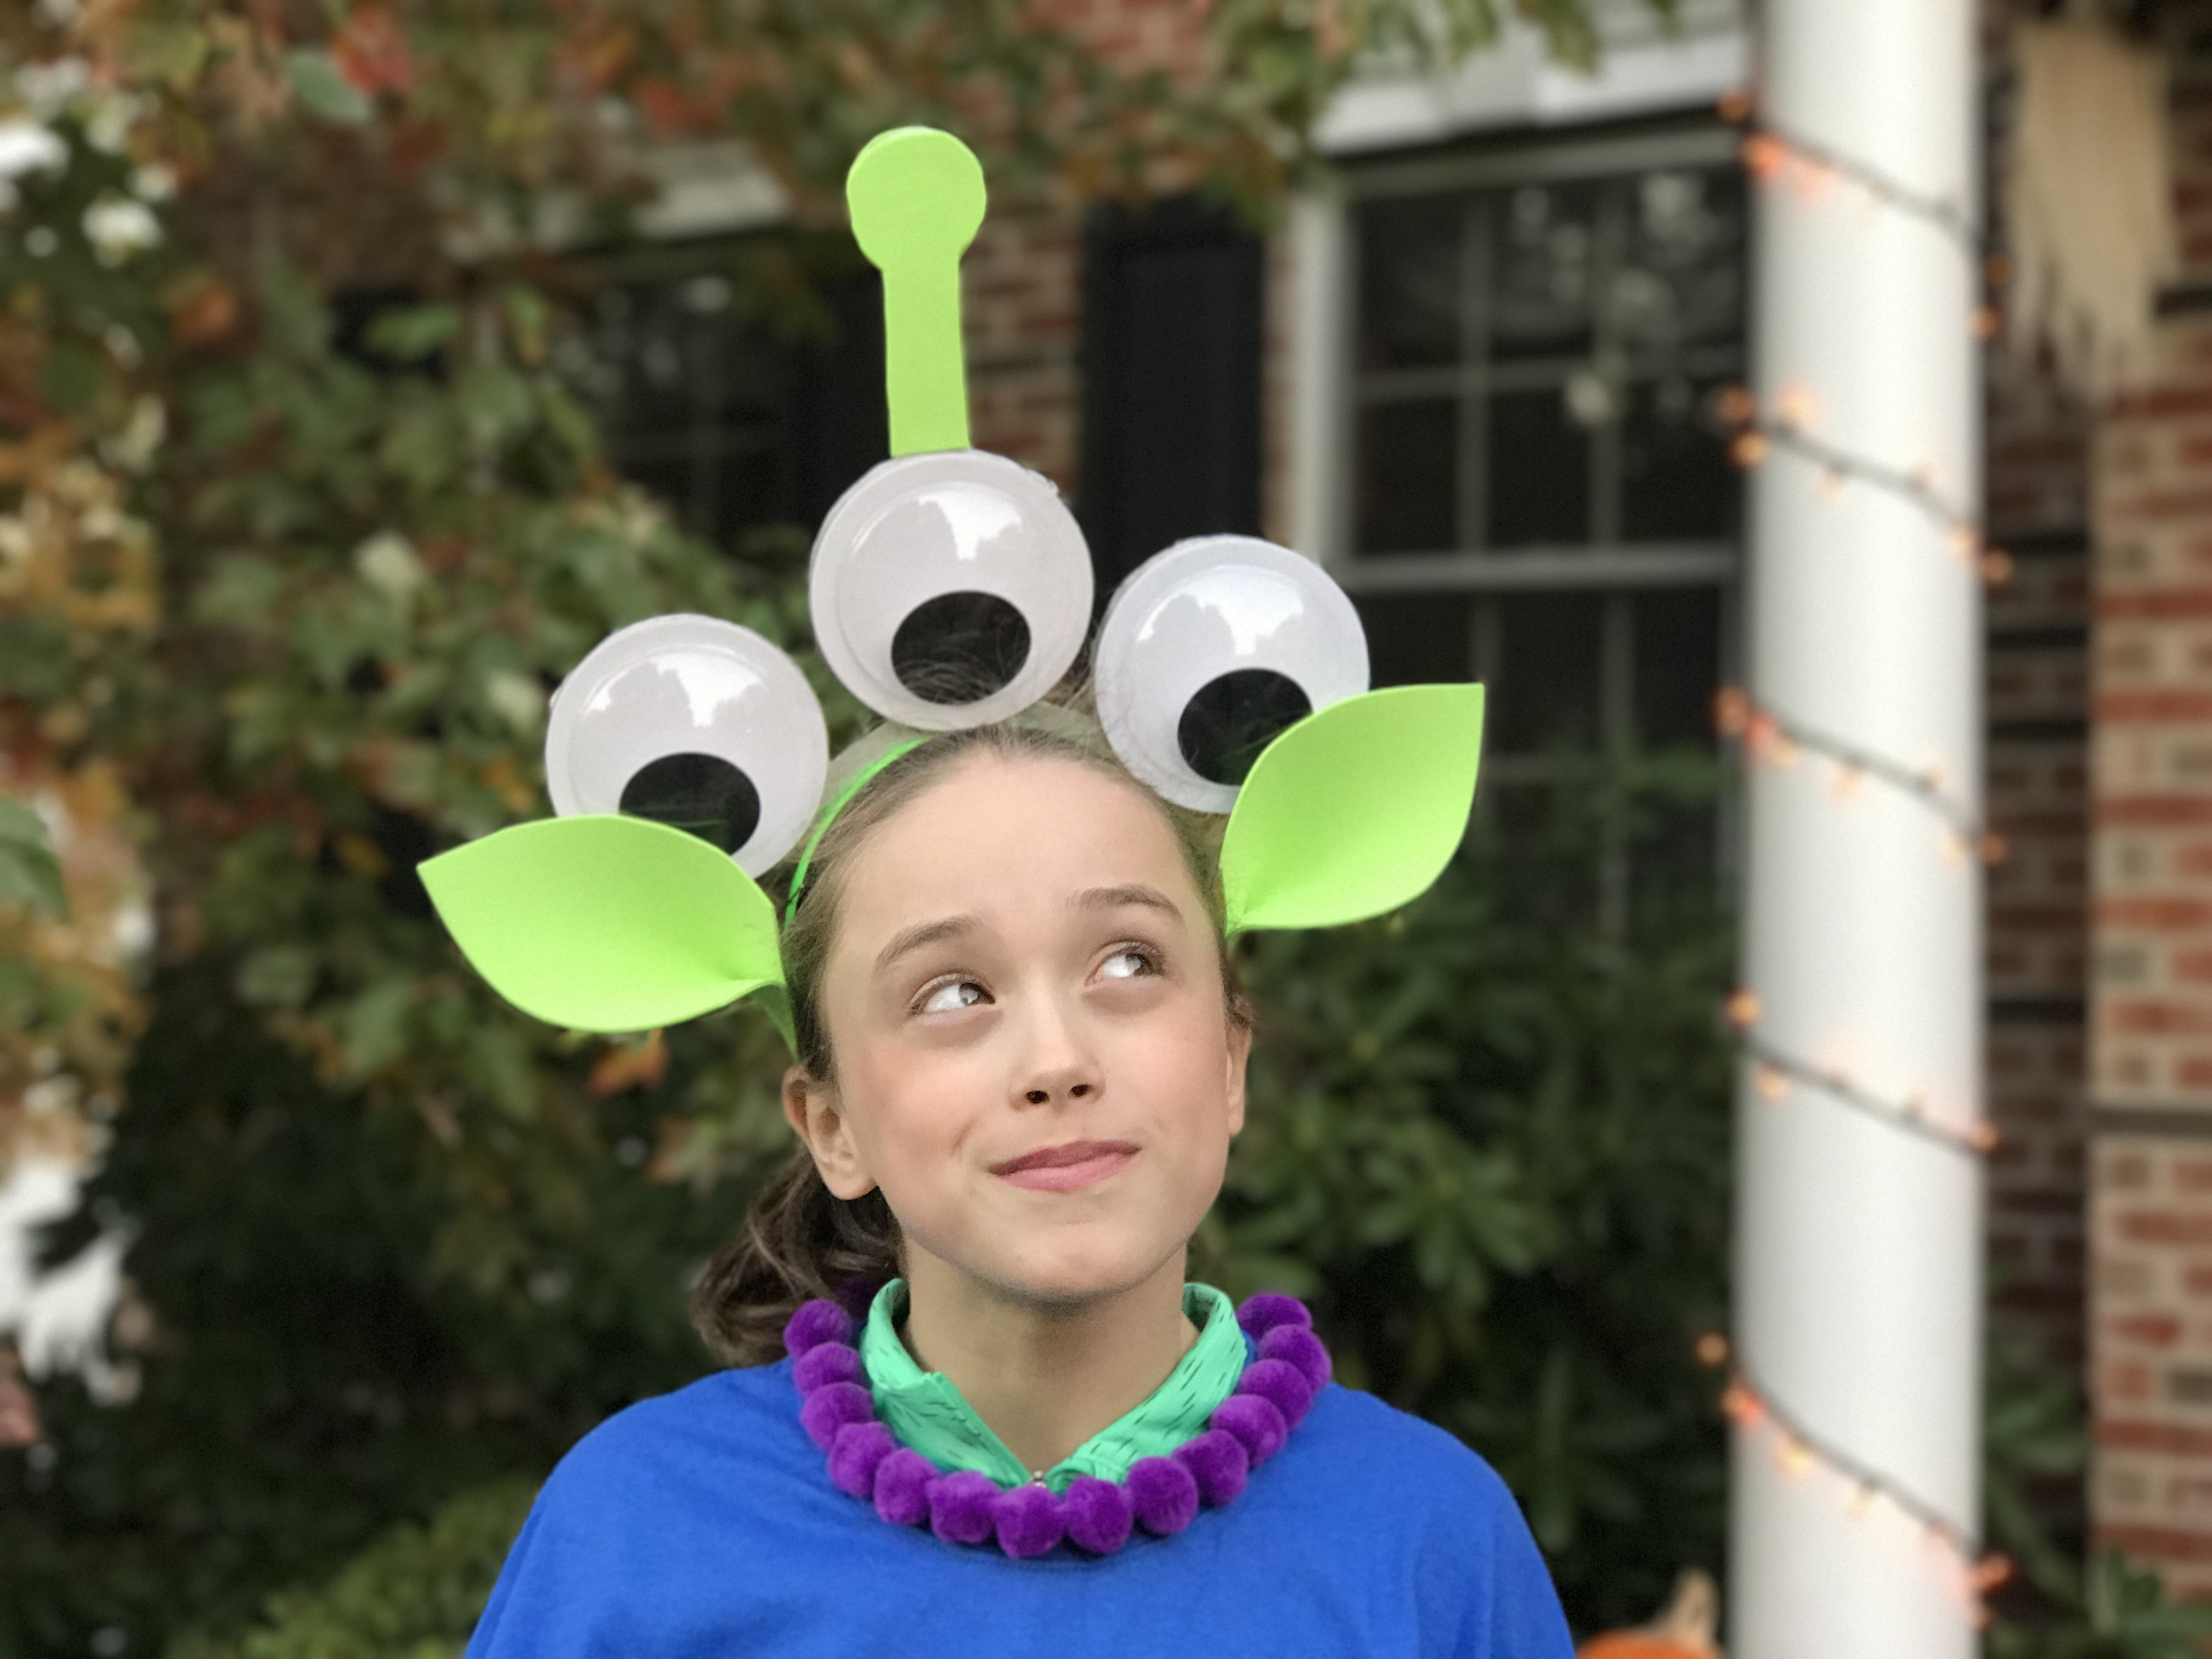 Toy Story Alien Costume DIY
 How to Make a DIY Toy Story Alien Costume ToyStoryLand